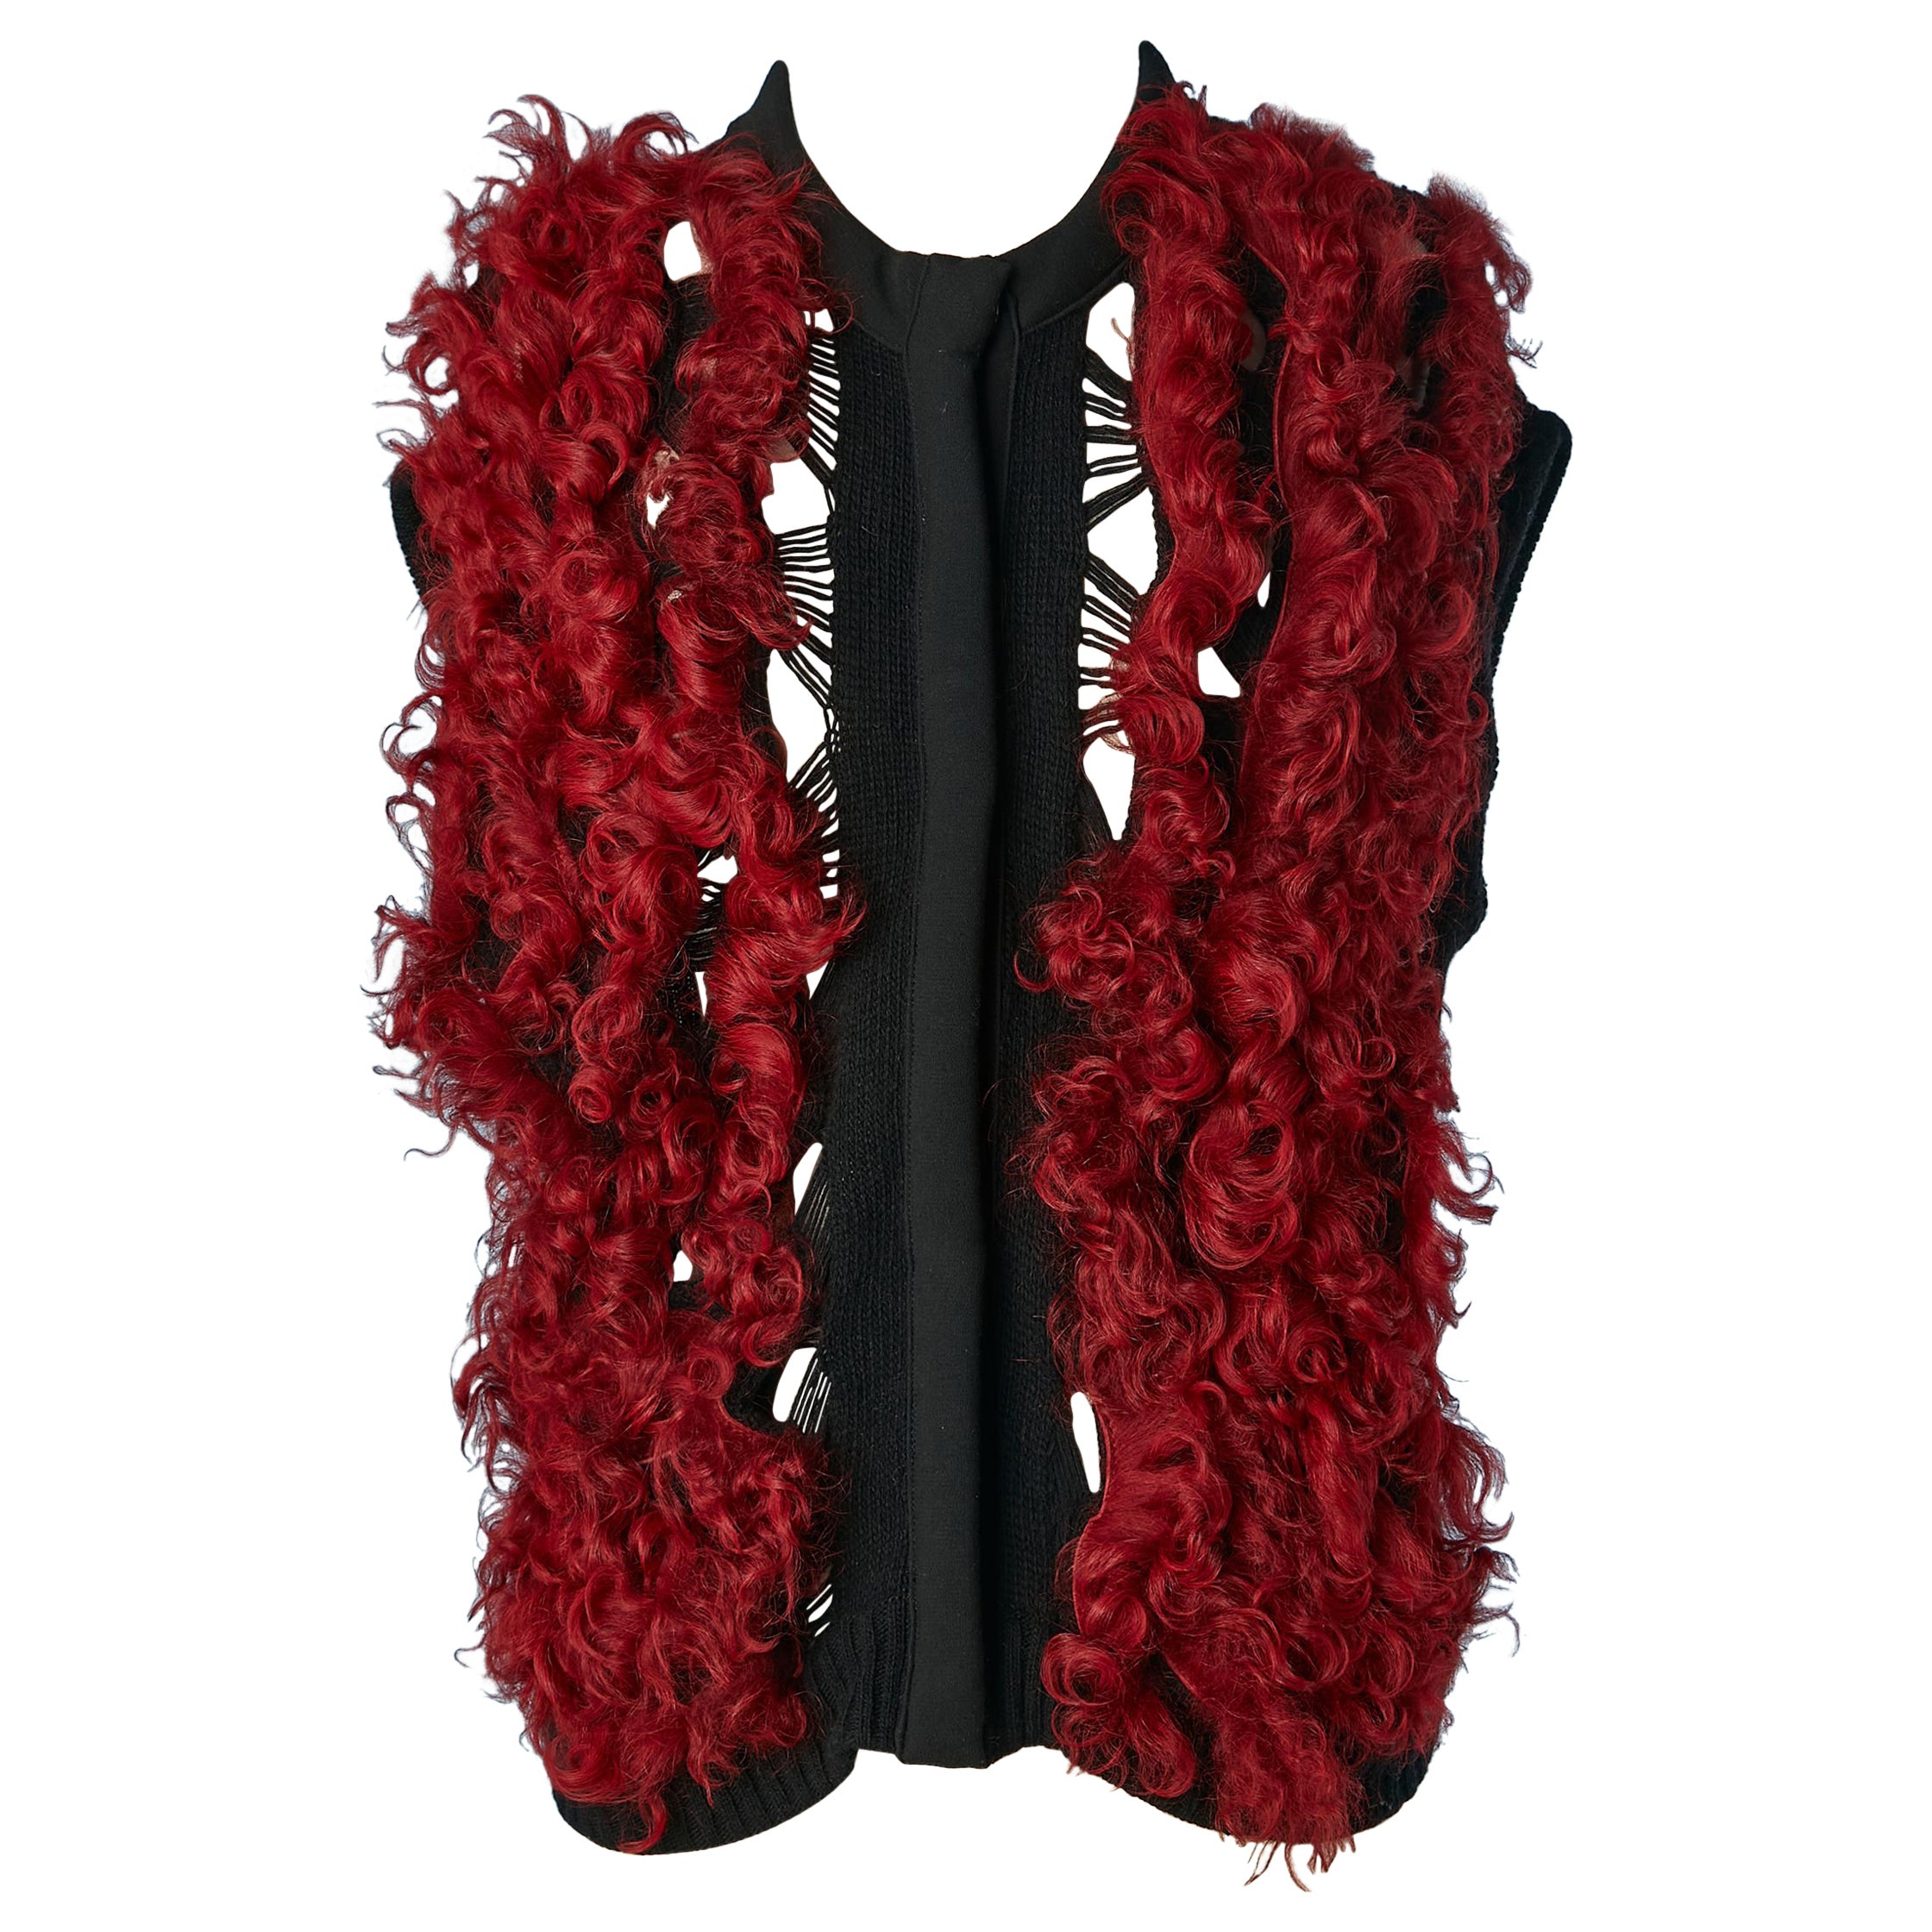 Black knit sleeveless vest with red curly furs appliqué Paolo Errico 